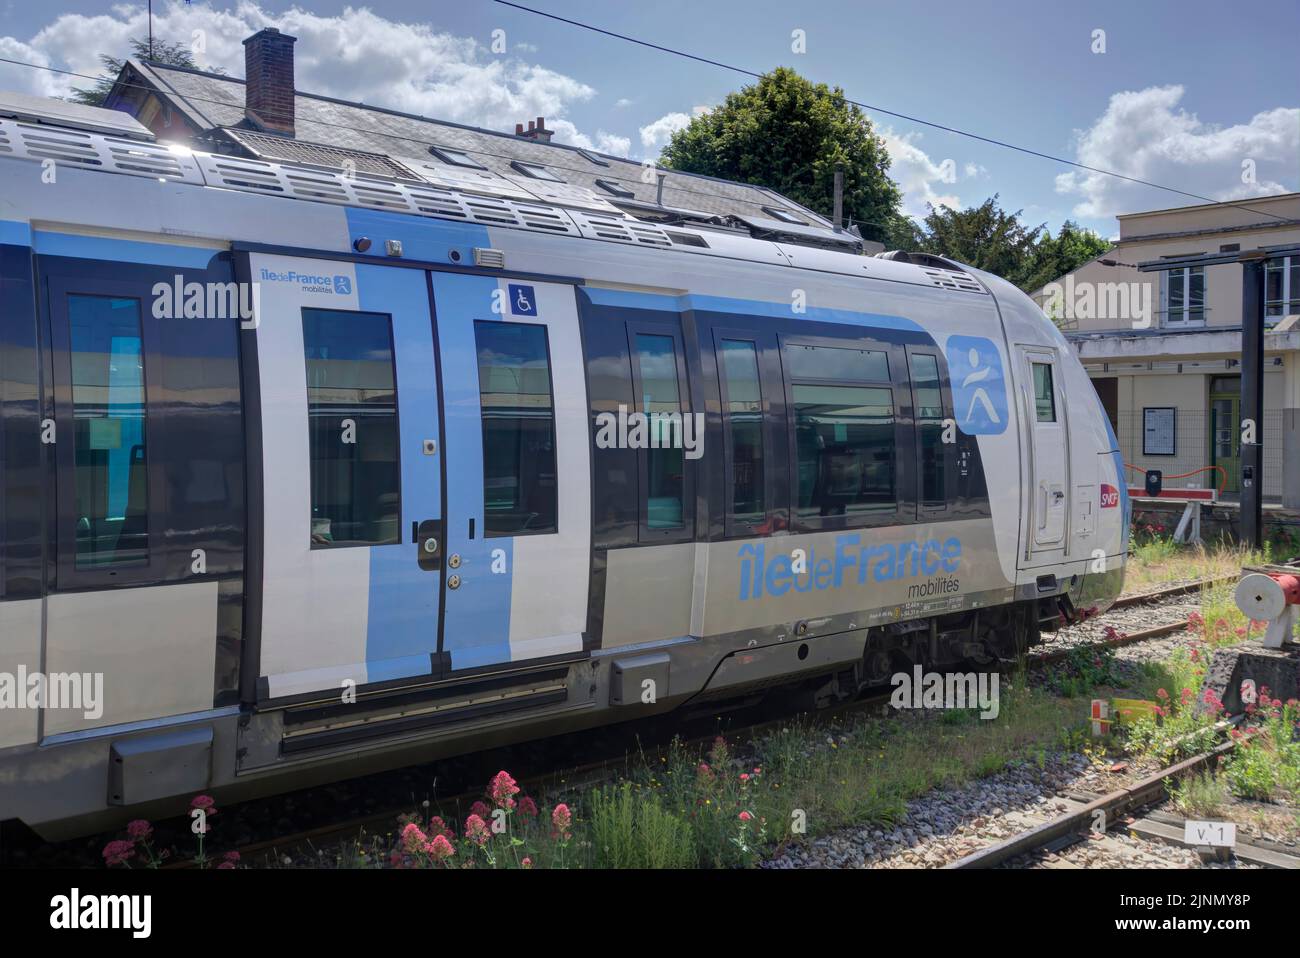 Versailles, France - May 28, 2022: Train at Versailles Rive Droite railway station showing iledeFrance logo Stock Photo